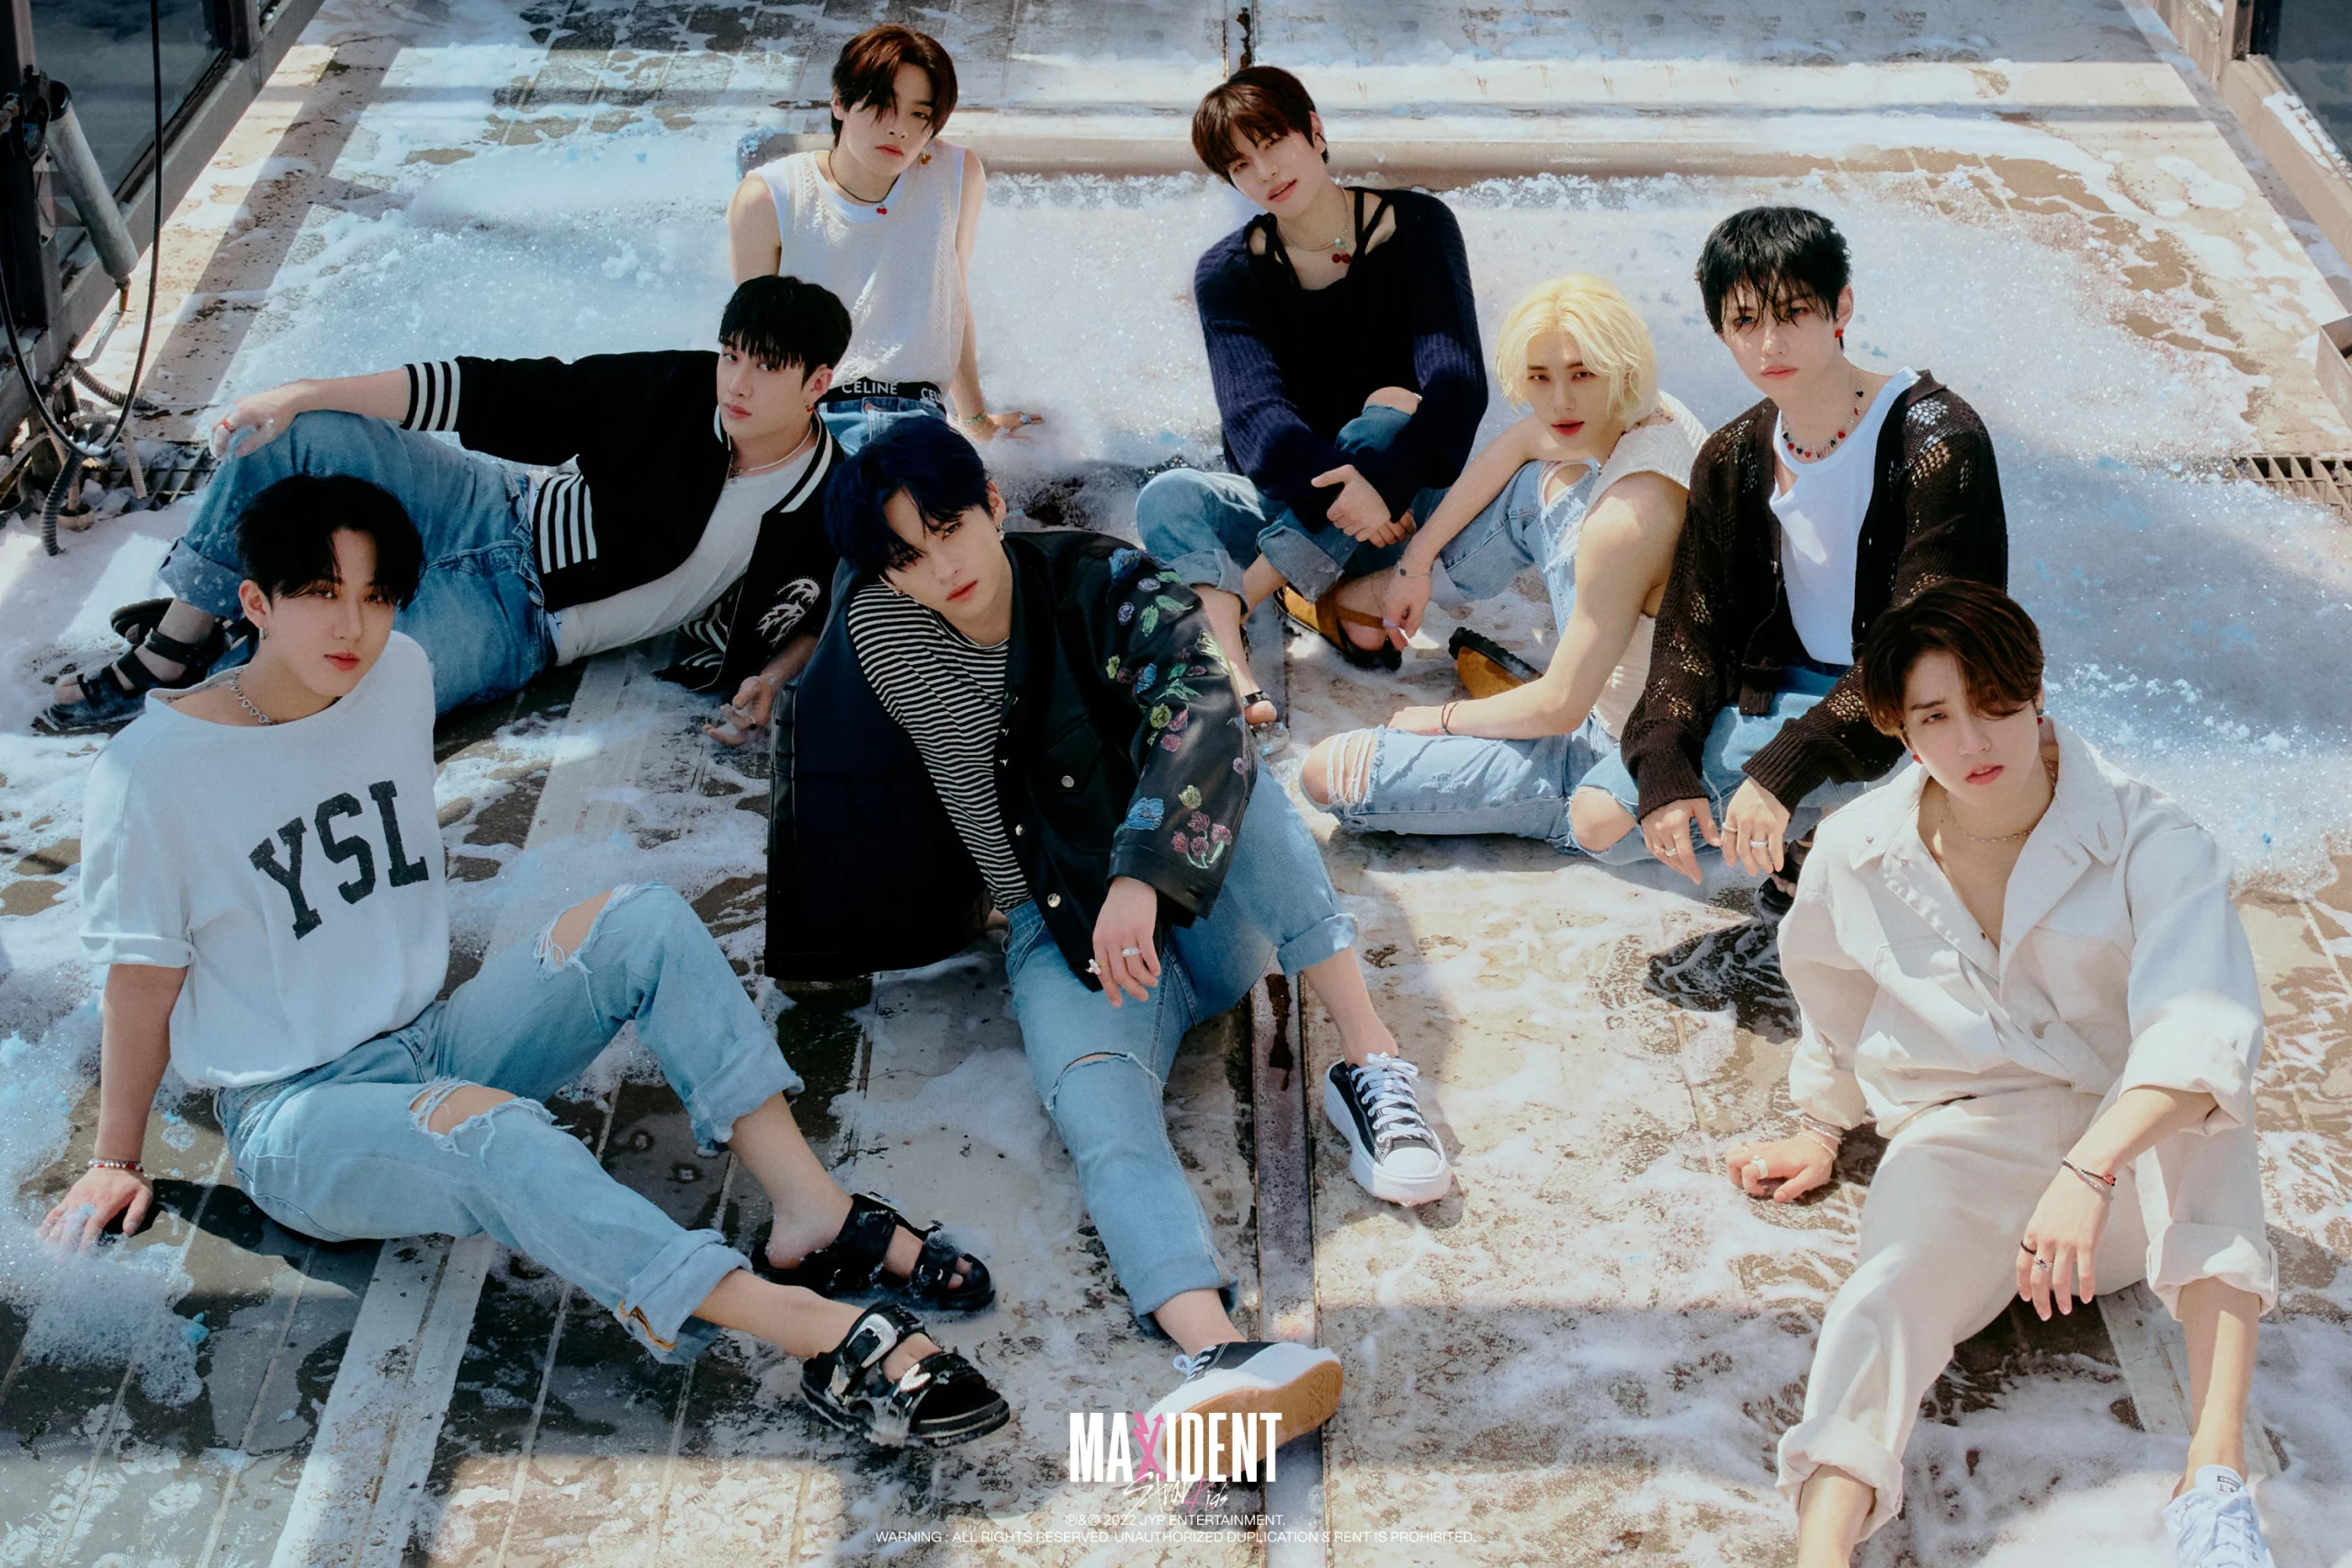 Stray Kids – New Video Released “Chill” – 6 Unknown Facts